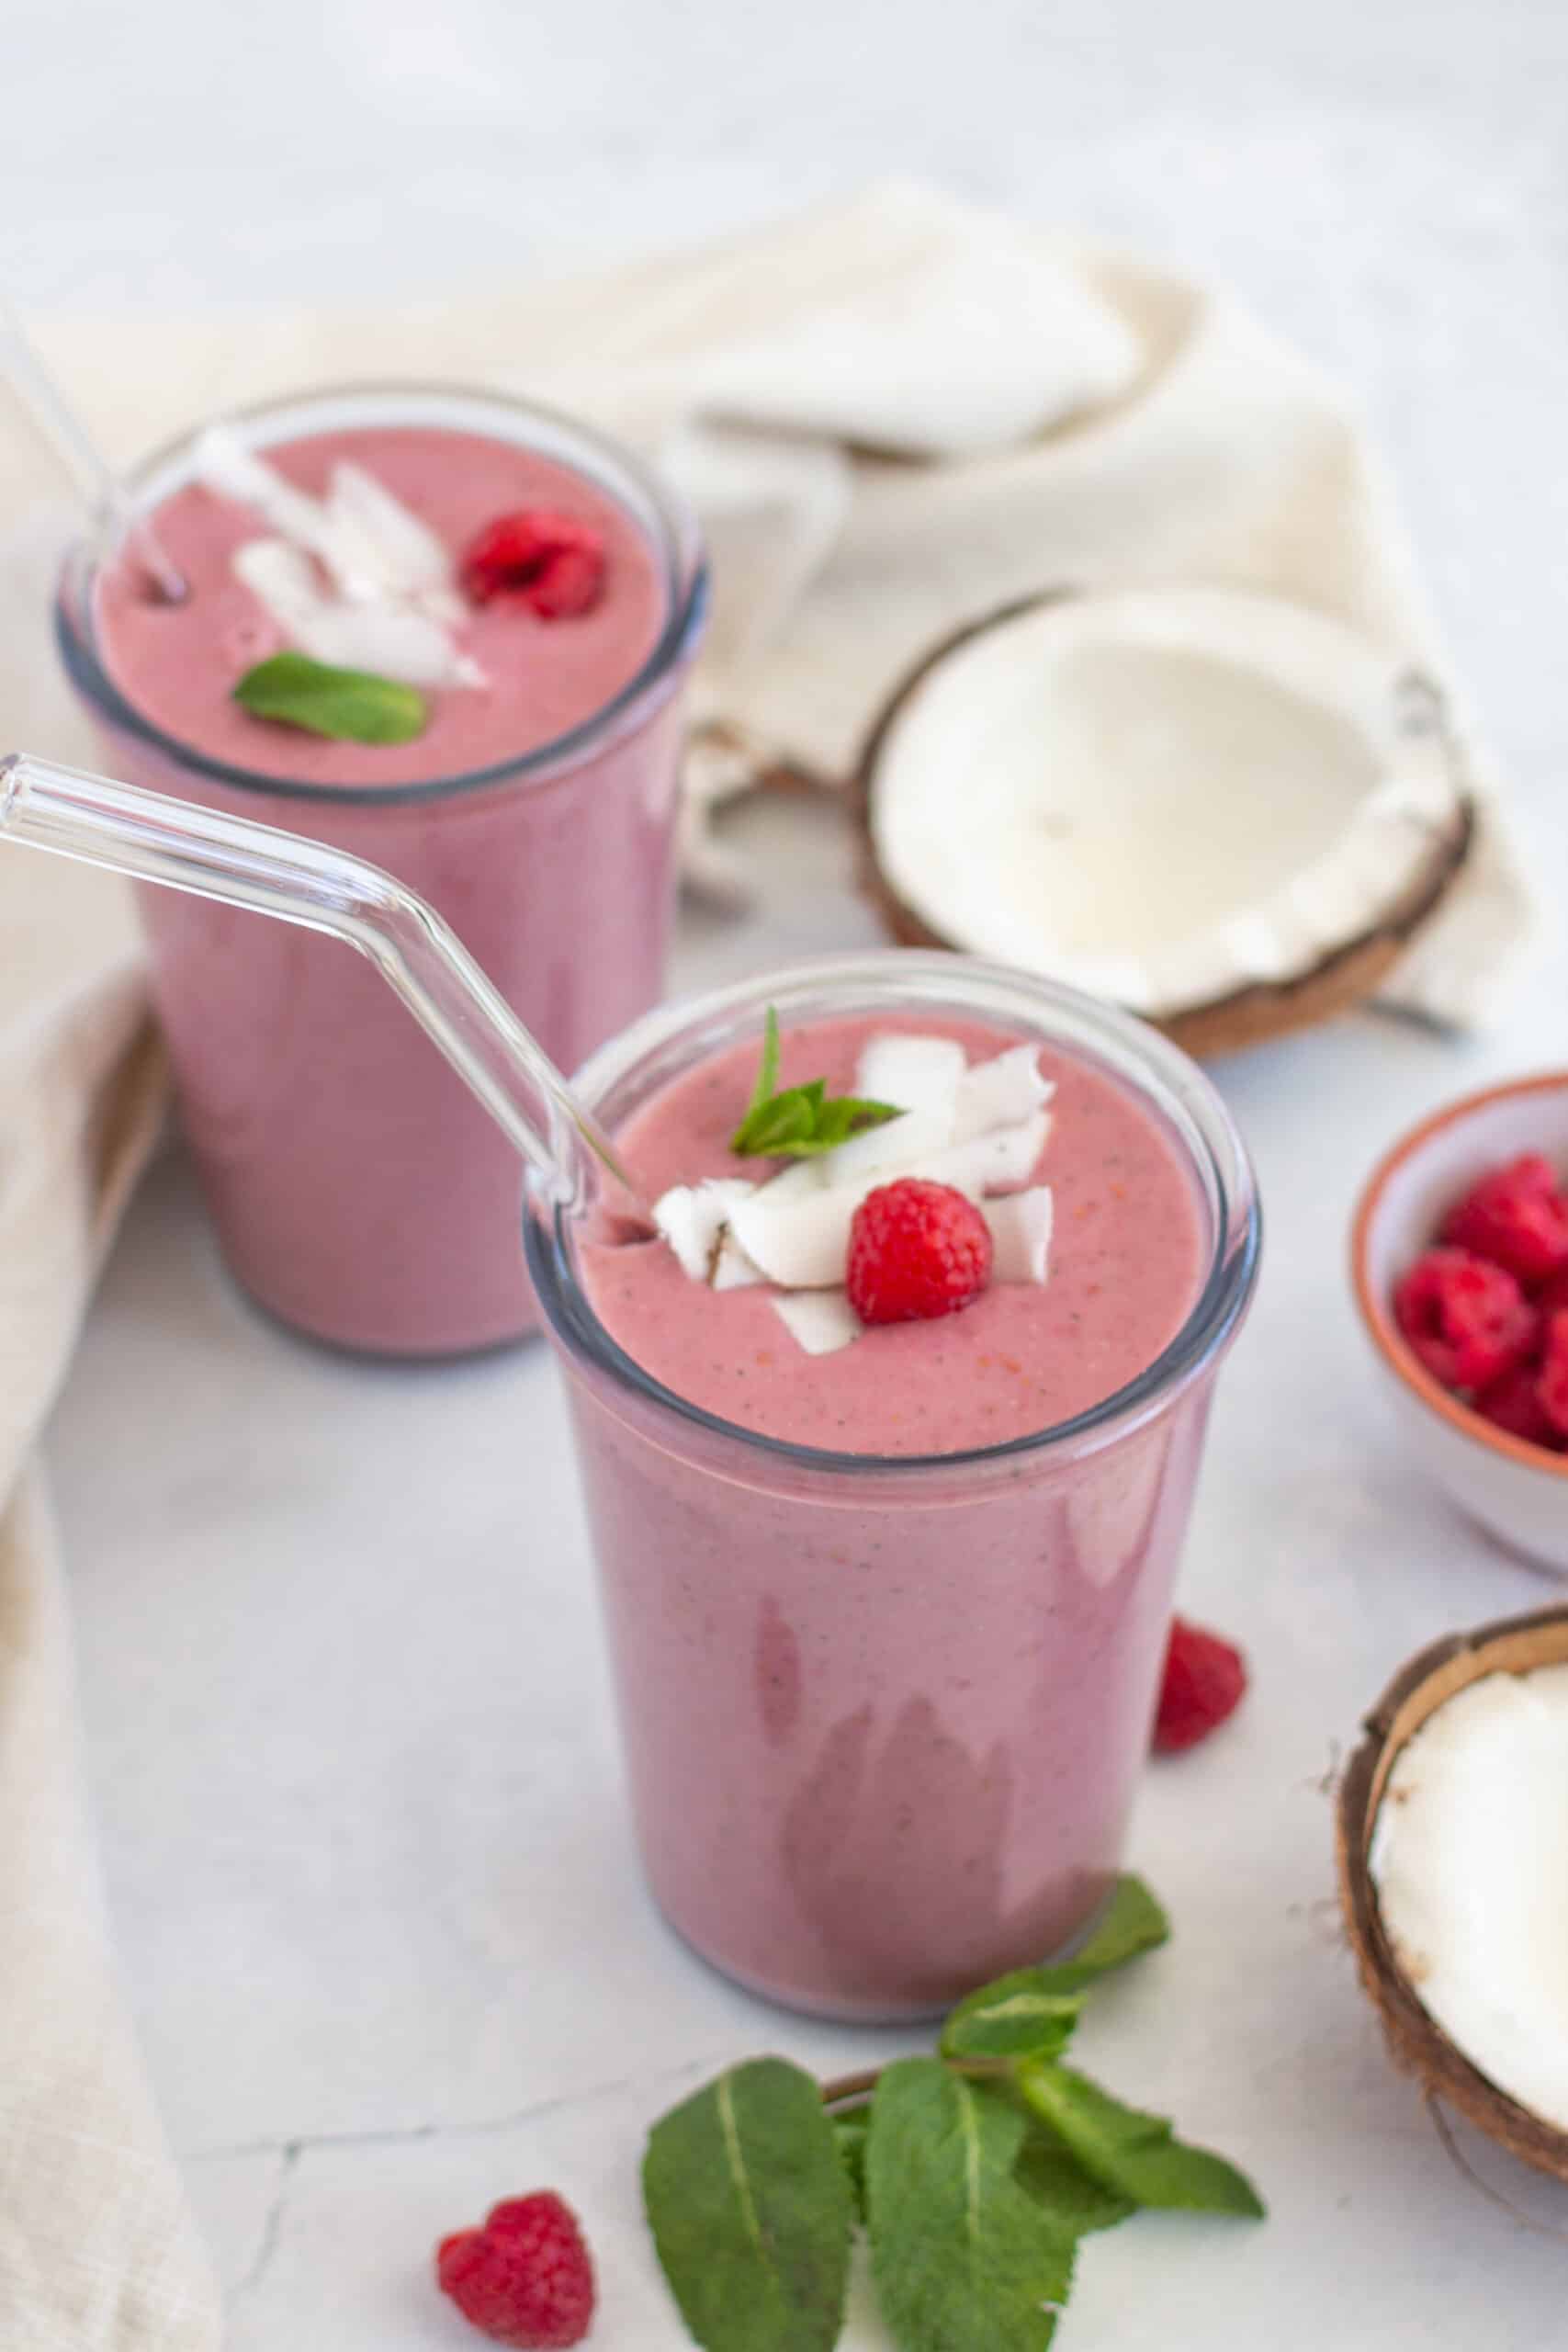 A red protein smoothie served in a glass with some fresh coconut in the background